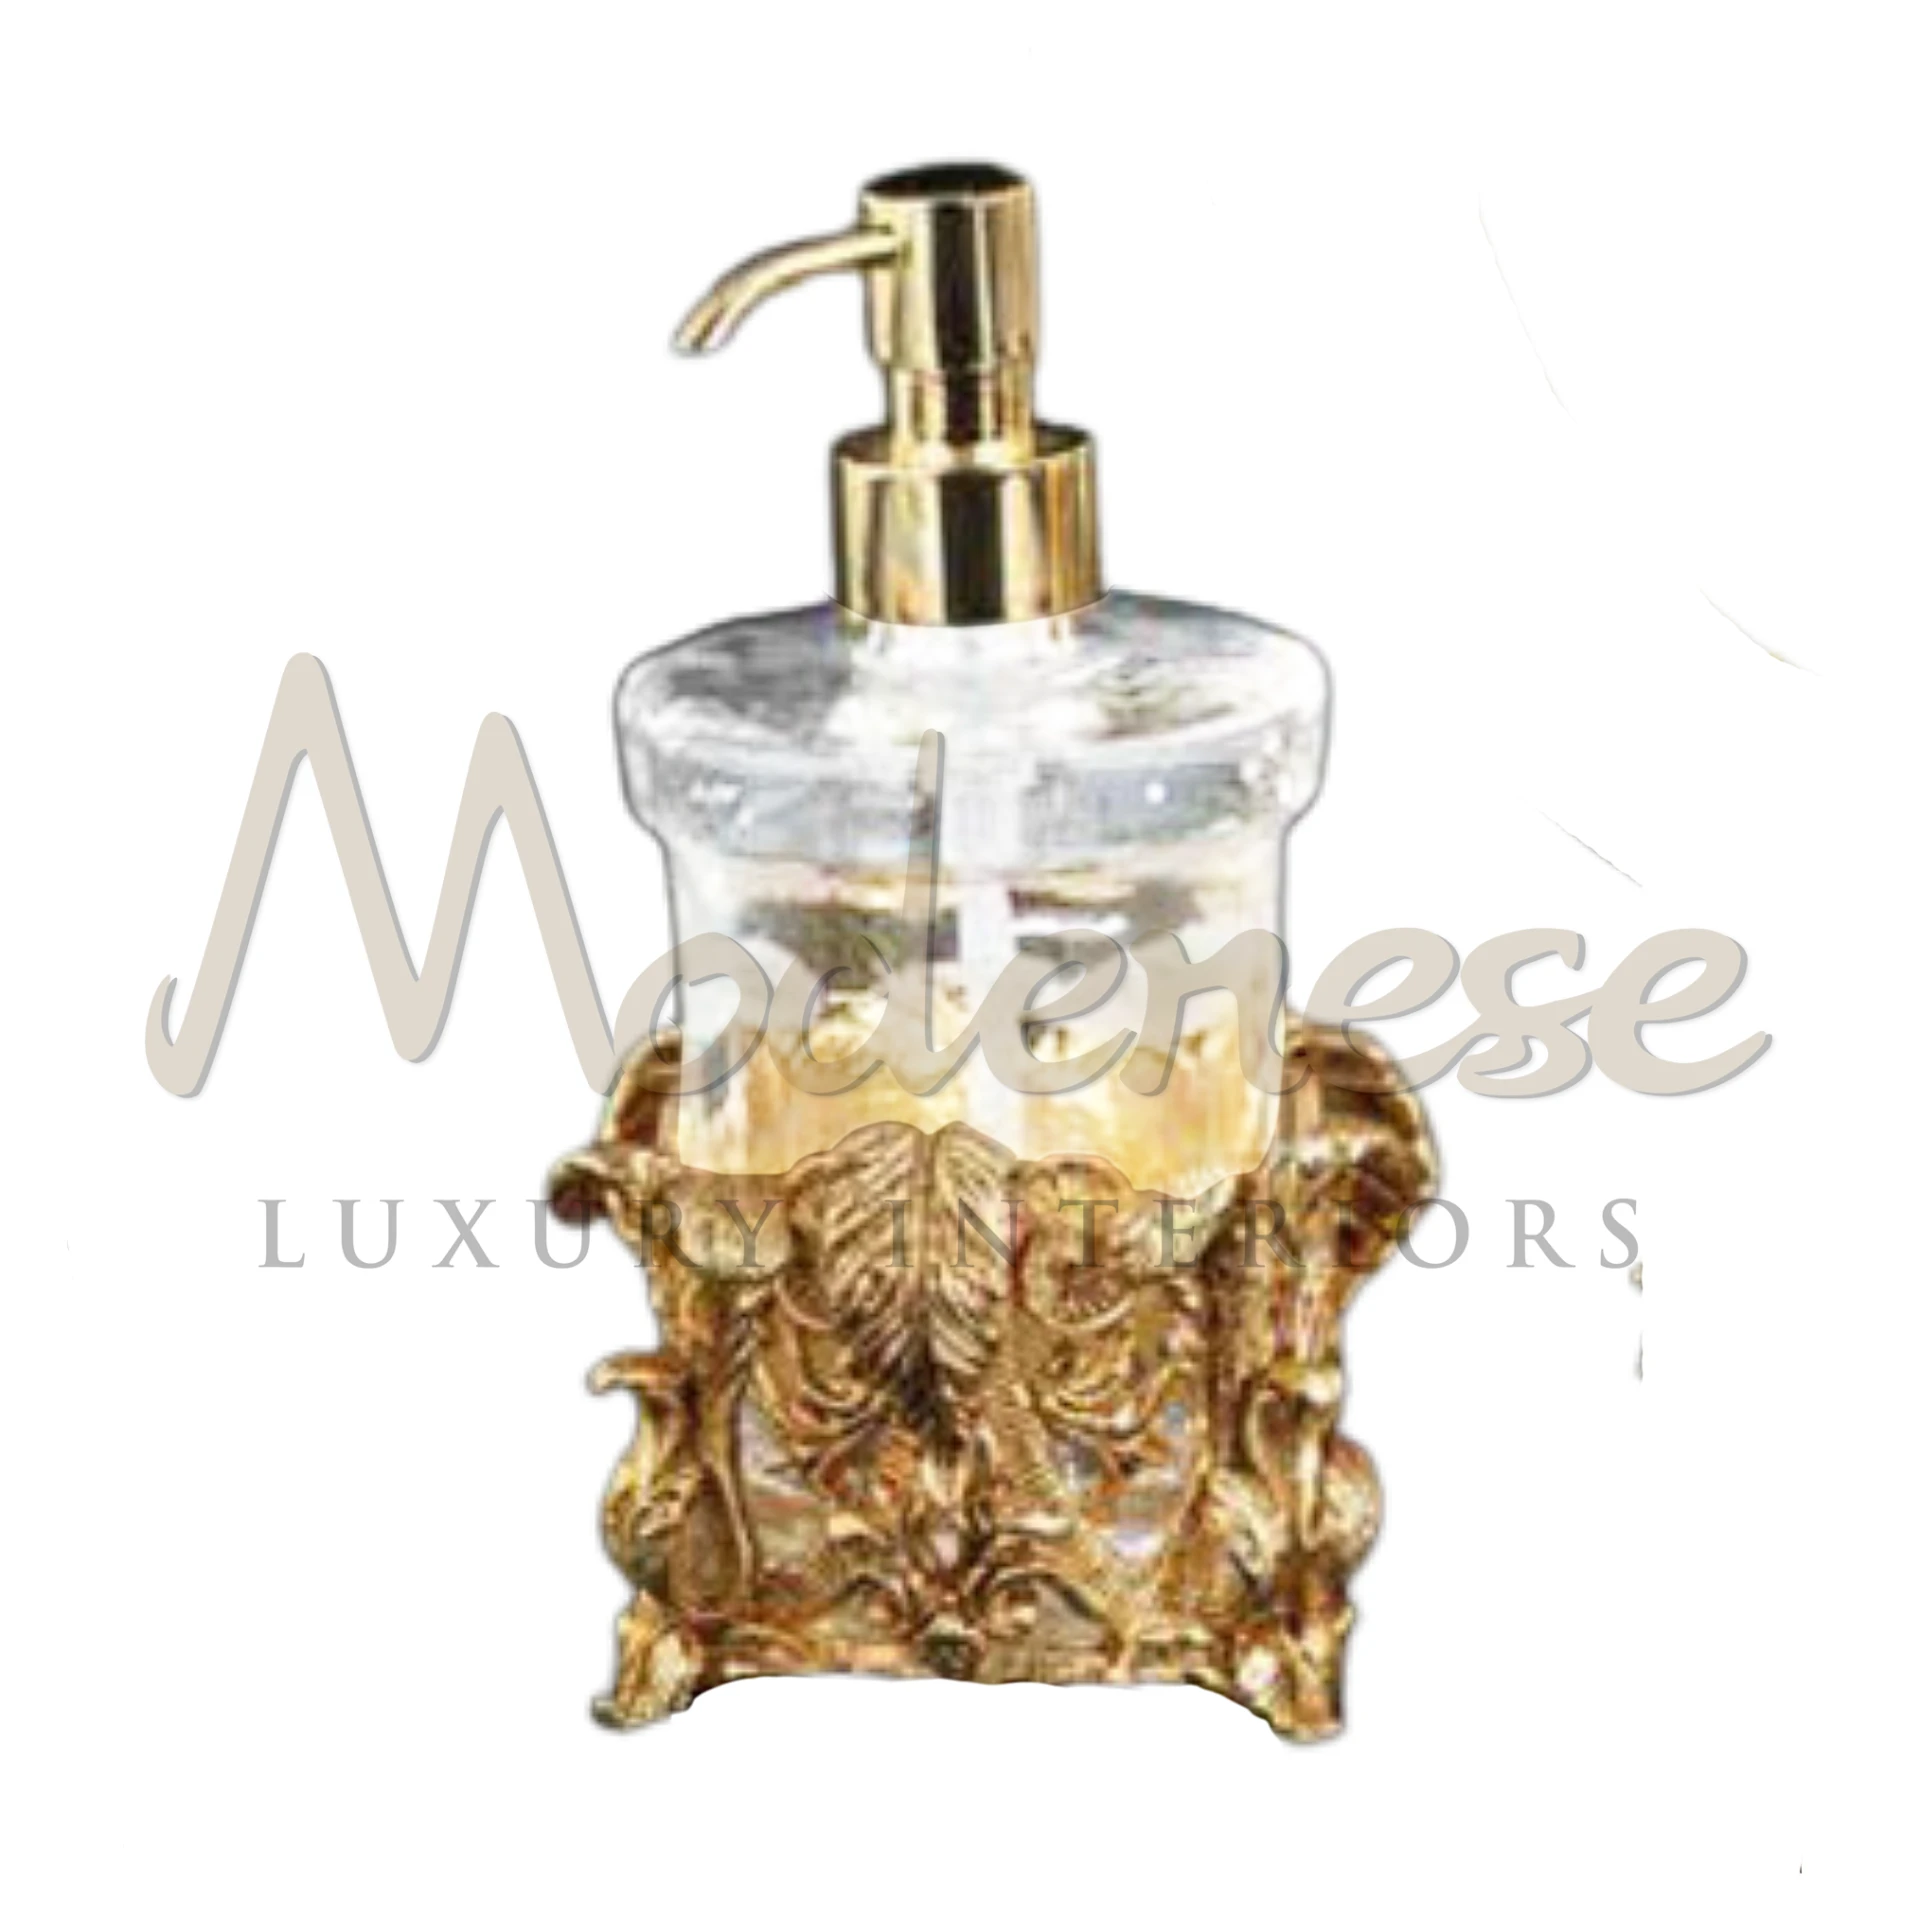 Designer Soap Dispenser with intricate designs and elegant finishes, combining practicality and style to enhance the aesthetics of modern bathroom interiors.